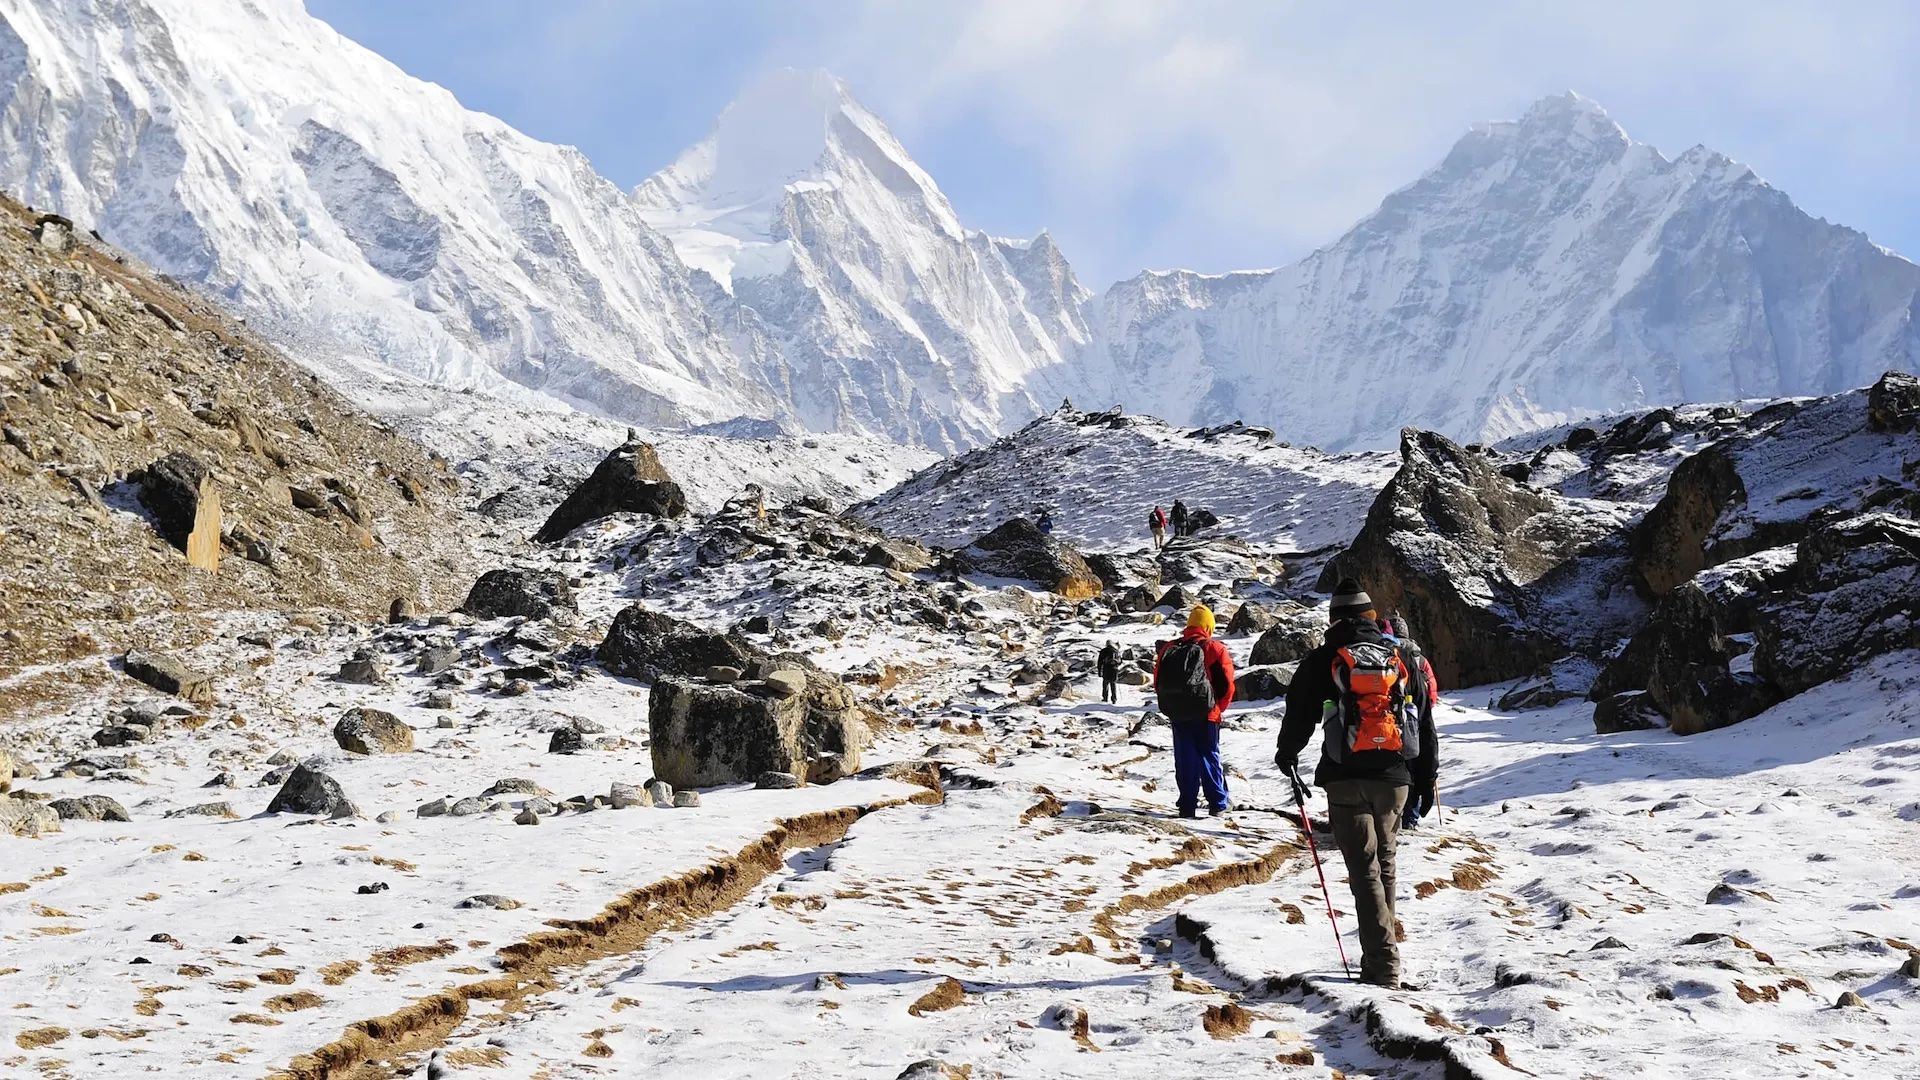 Trekkers in the snow going to Everest Base Camp